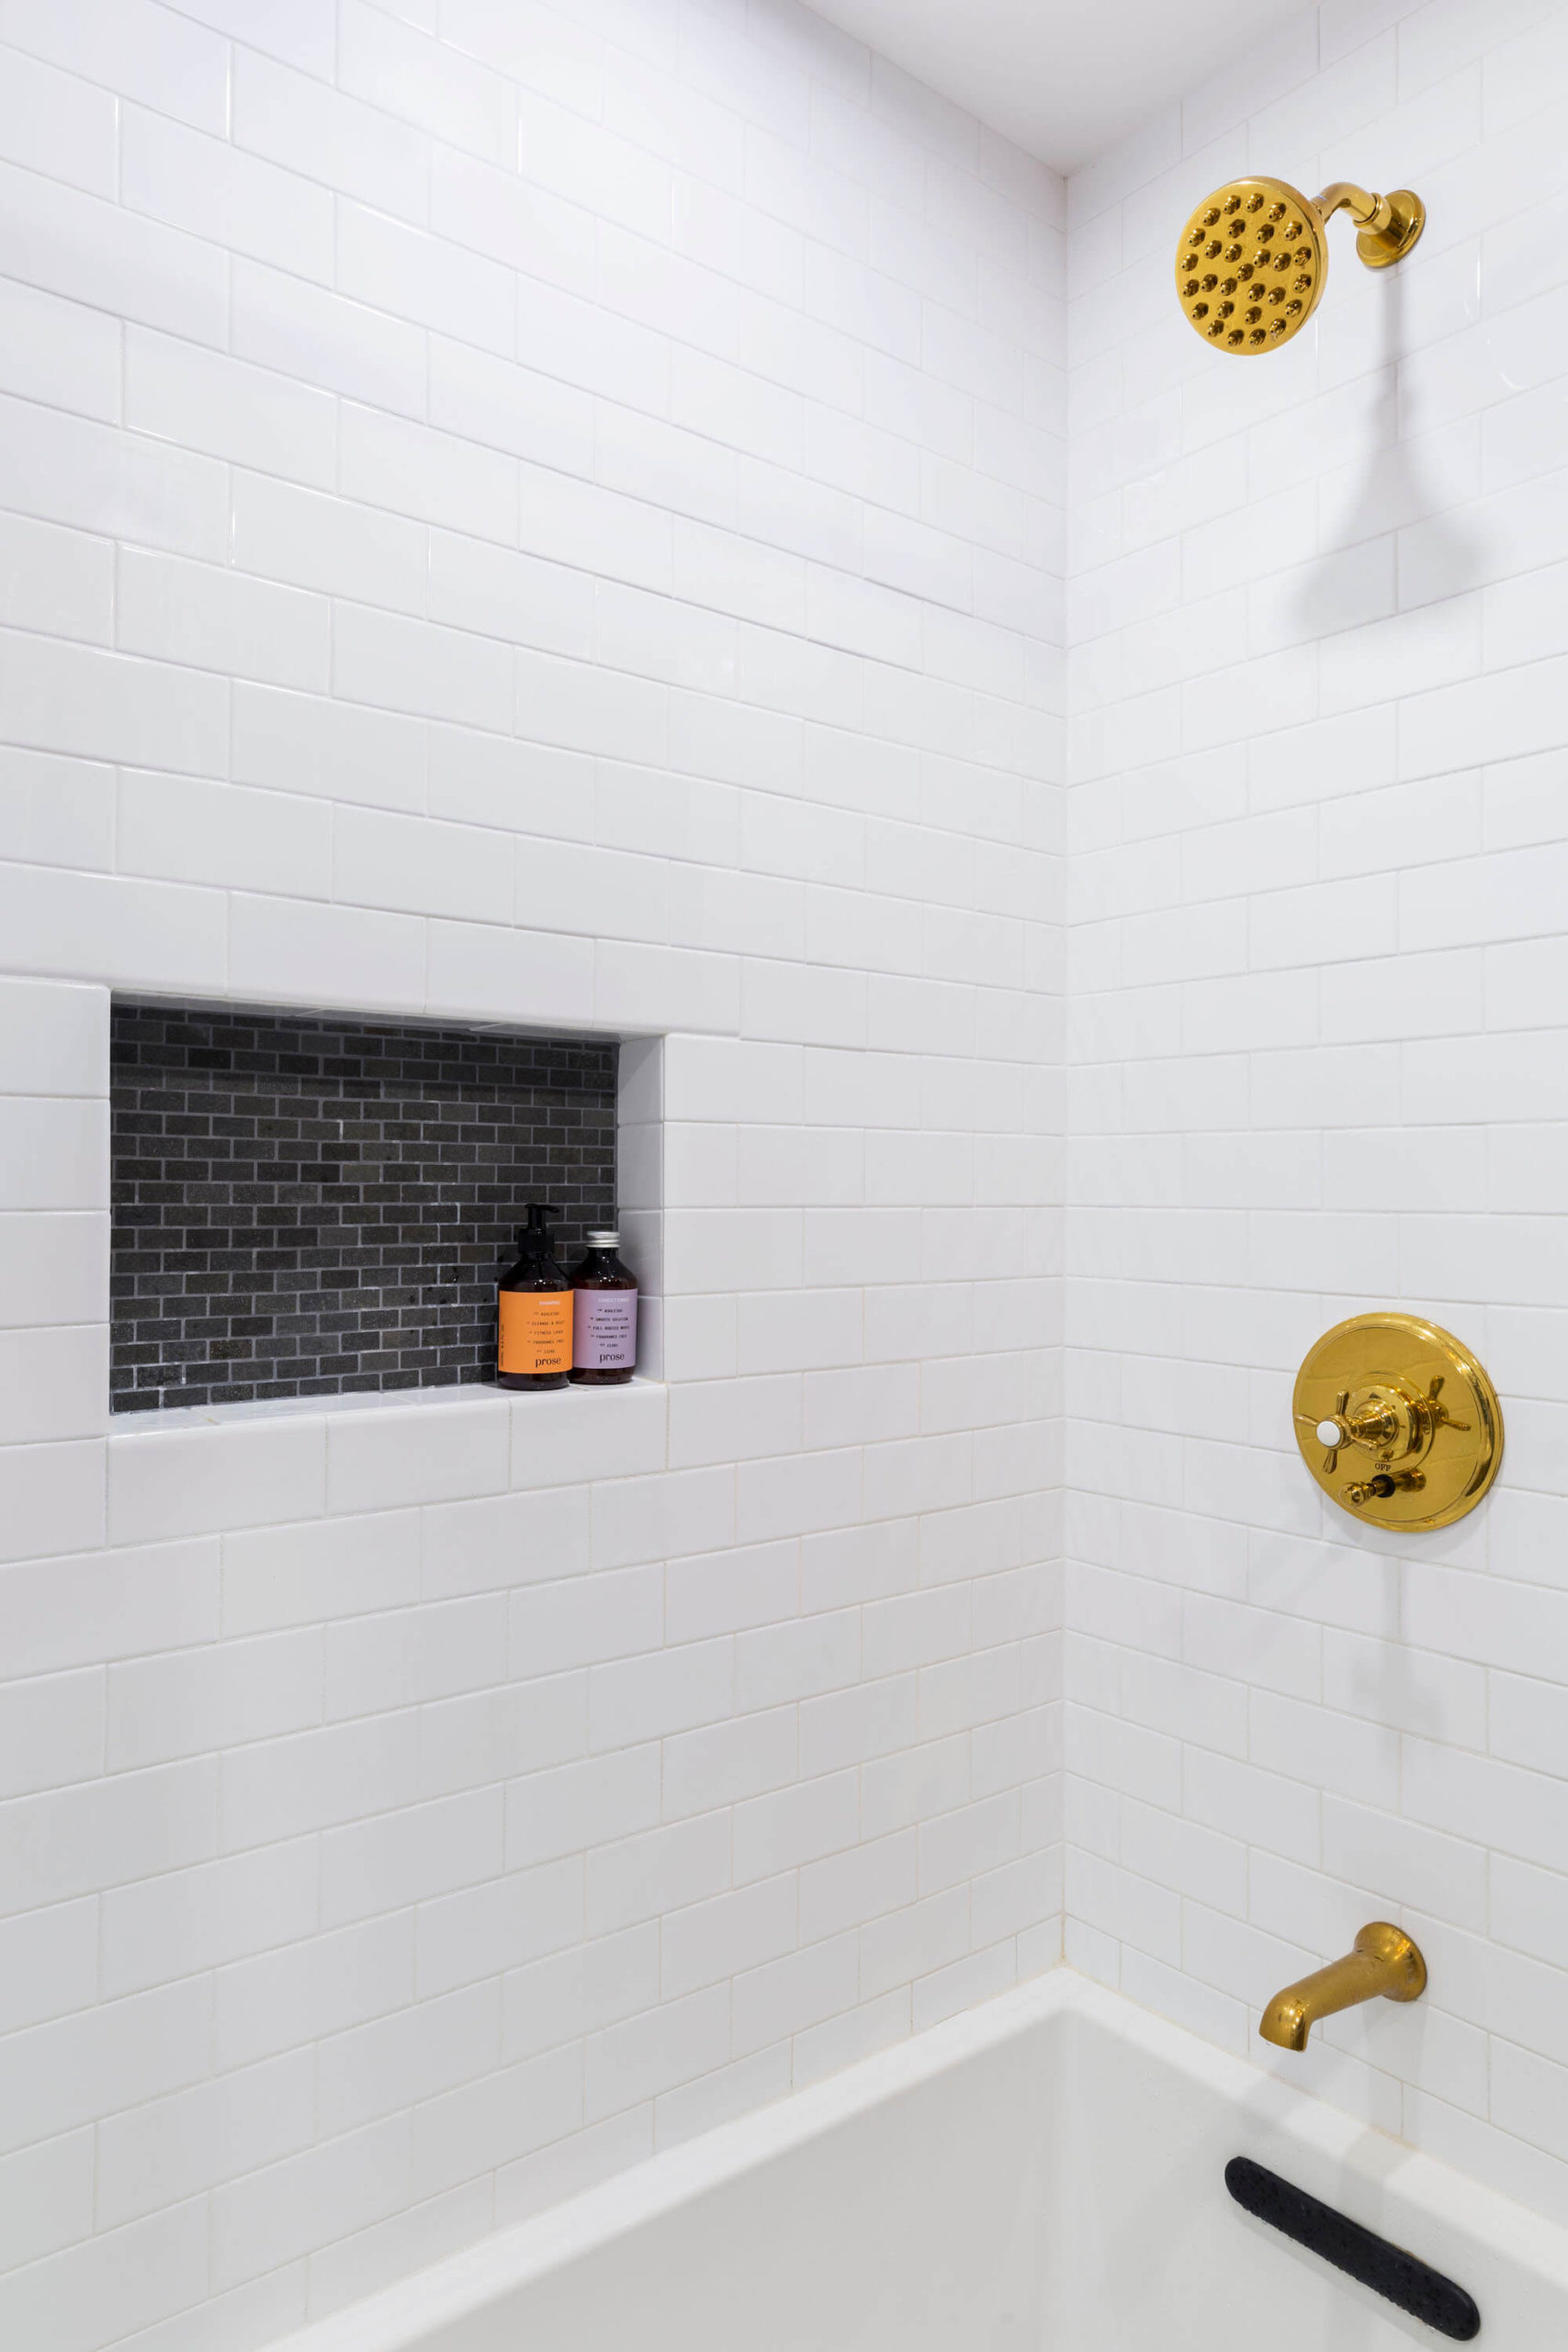 White subway tiles and little shower niche with brass shower head and shower valve over white bathtub after renovation